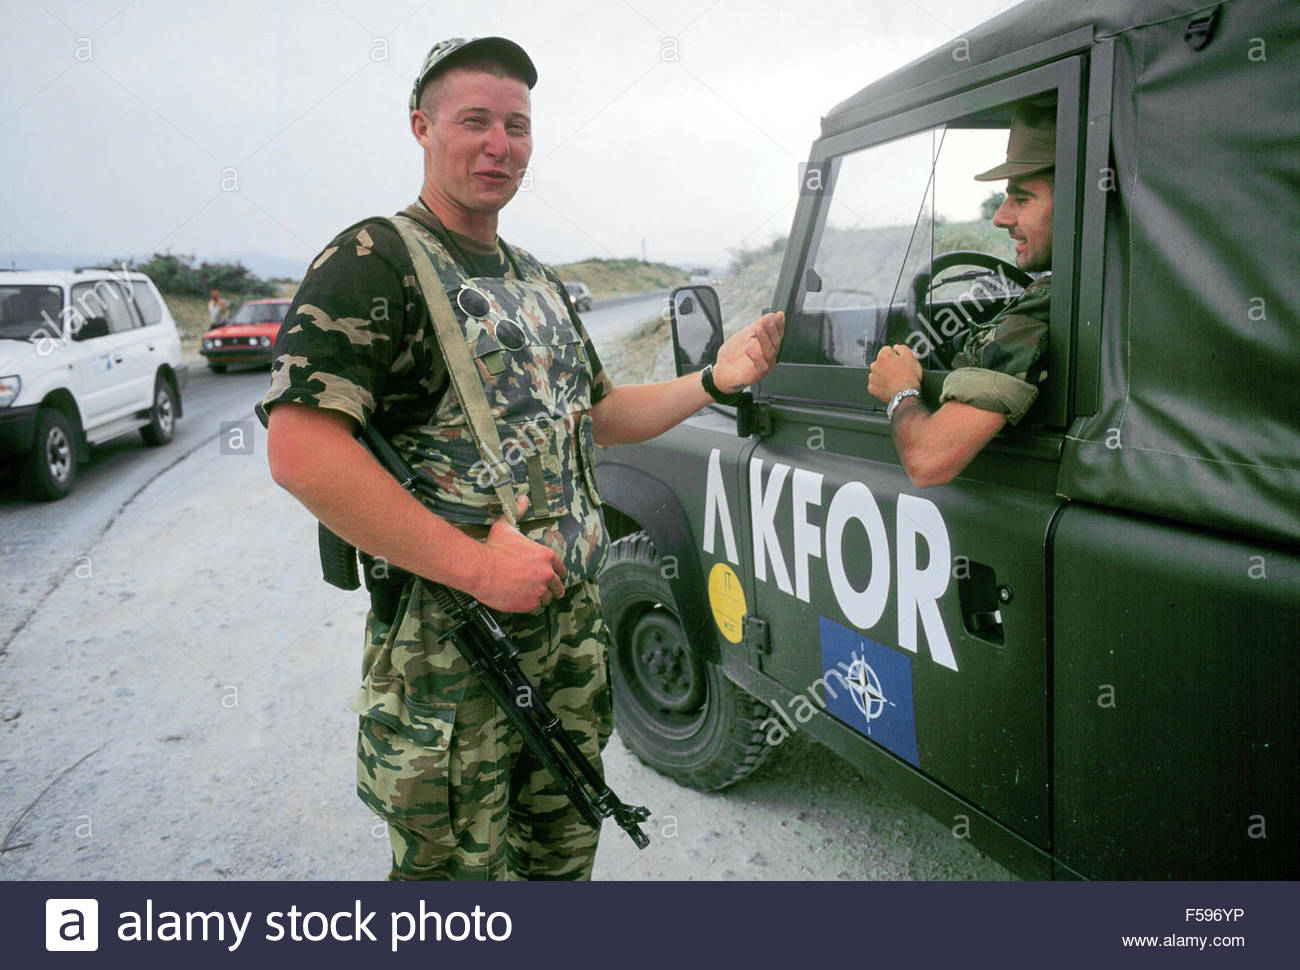 Kosovo, July 2000 Russian soldier on watch to a checkpoint on the Pristina-Pec road speaks wit...jpg